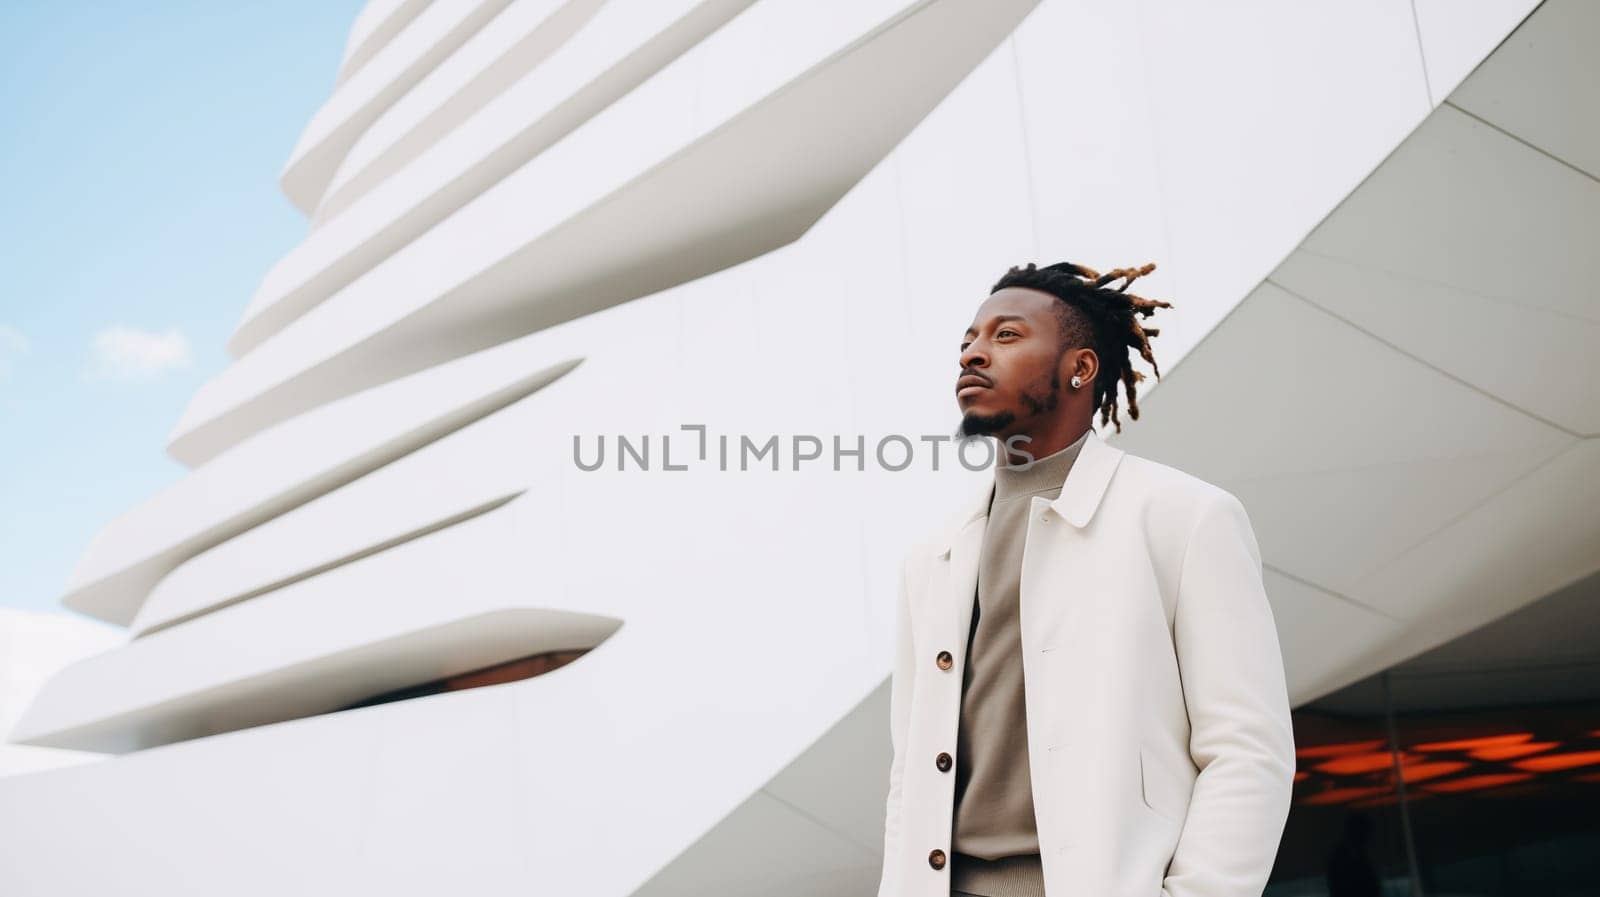 Fashionable confident stylish black man in suit, minimalism design architecture modern building by Rohappy